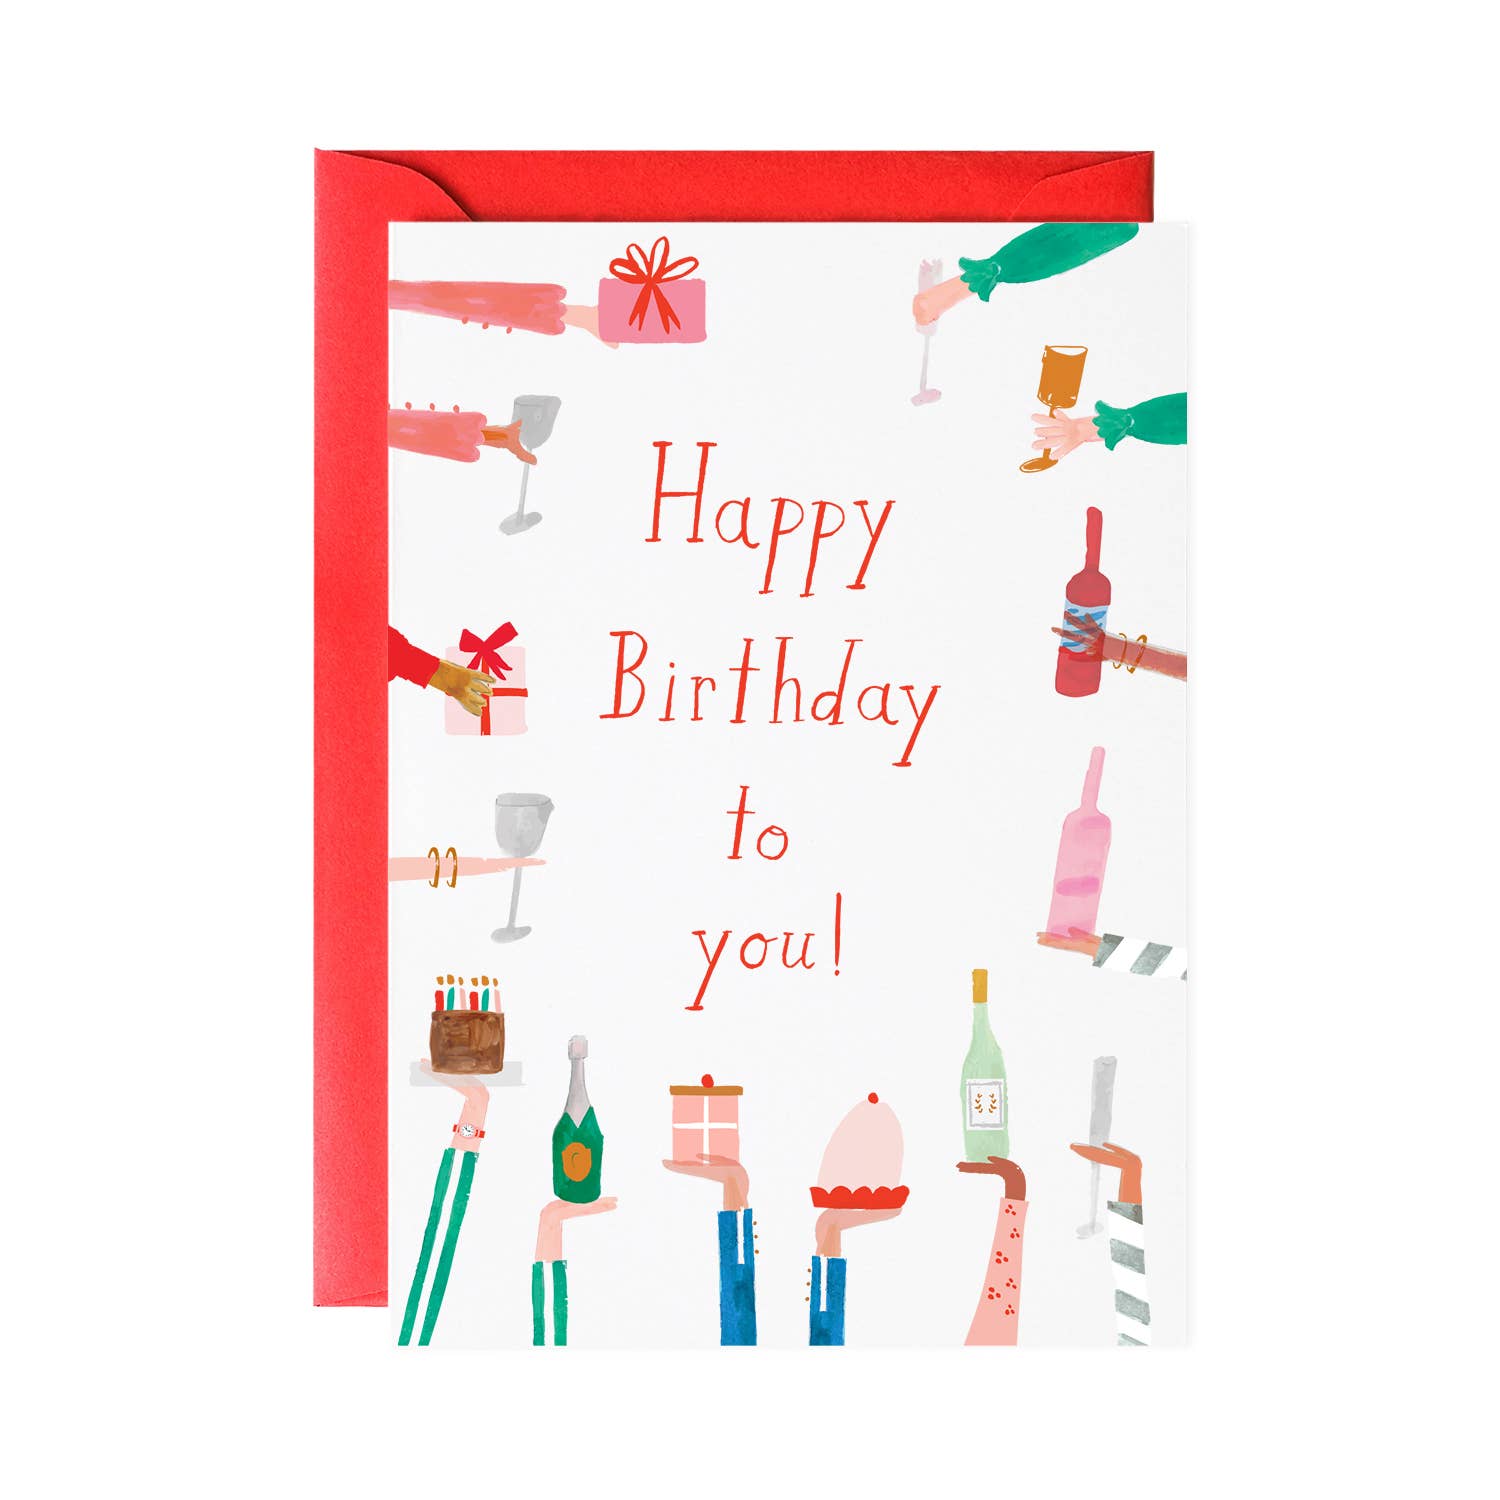 Birthday greeting card -- a bunch of different hands handing out a glass, gift, cake, and other birthday goodies. In the center it reads "Happy Birthday to you!"